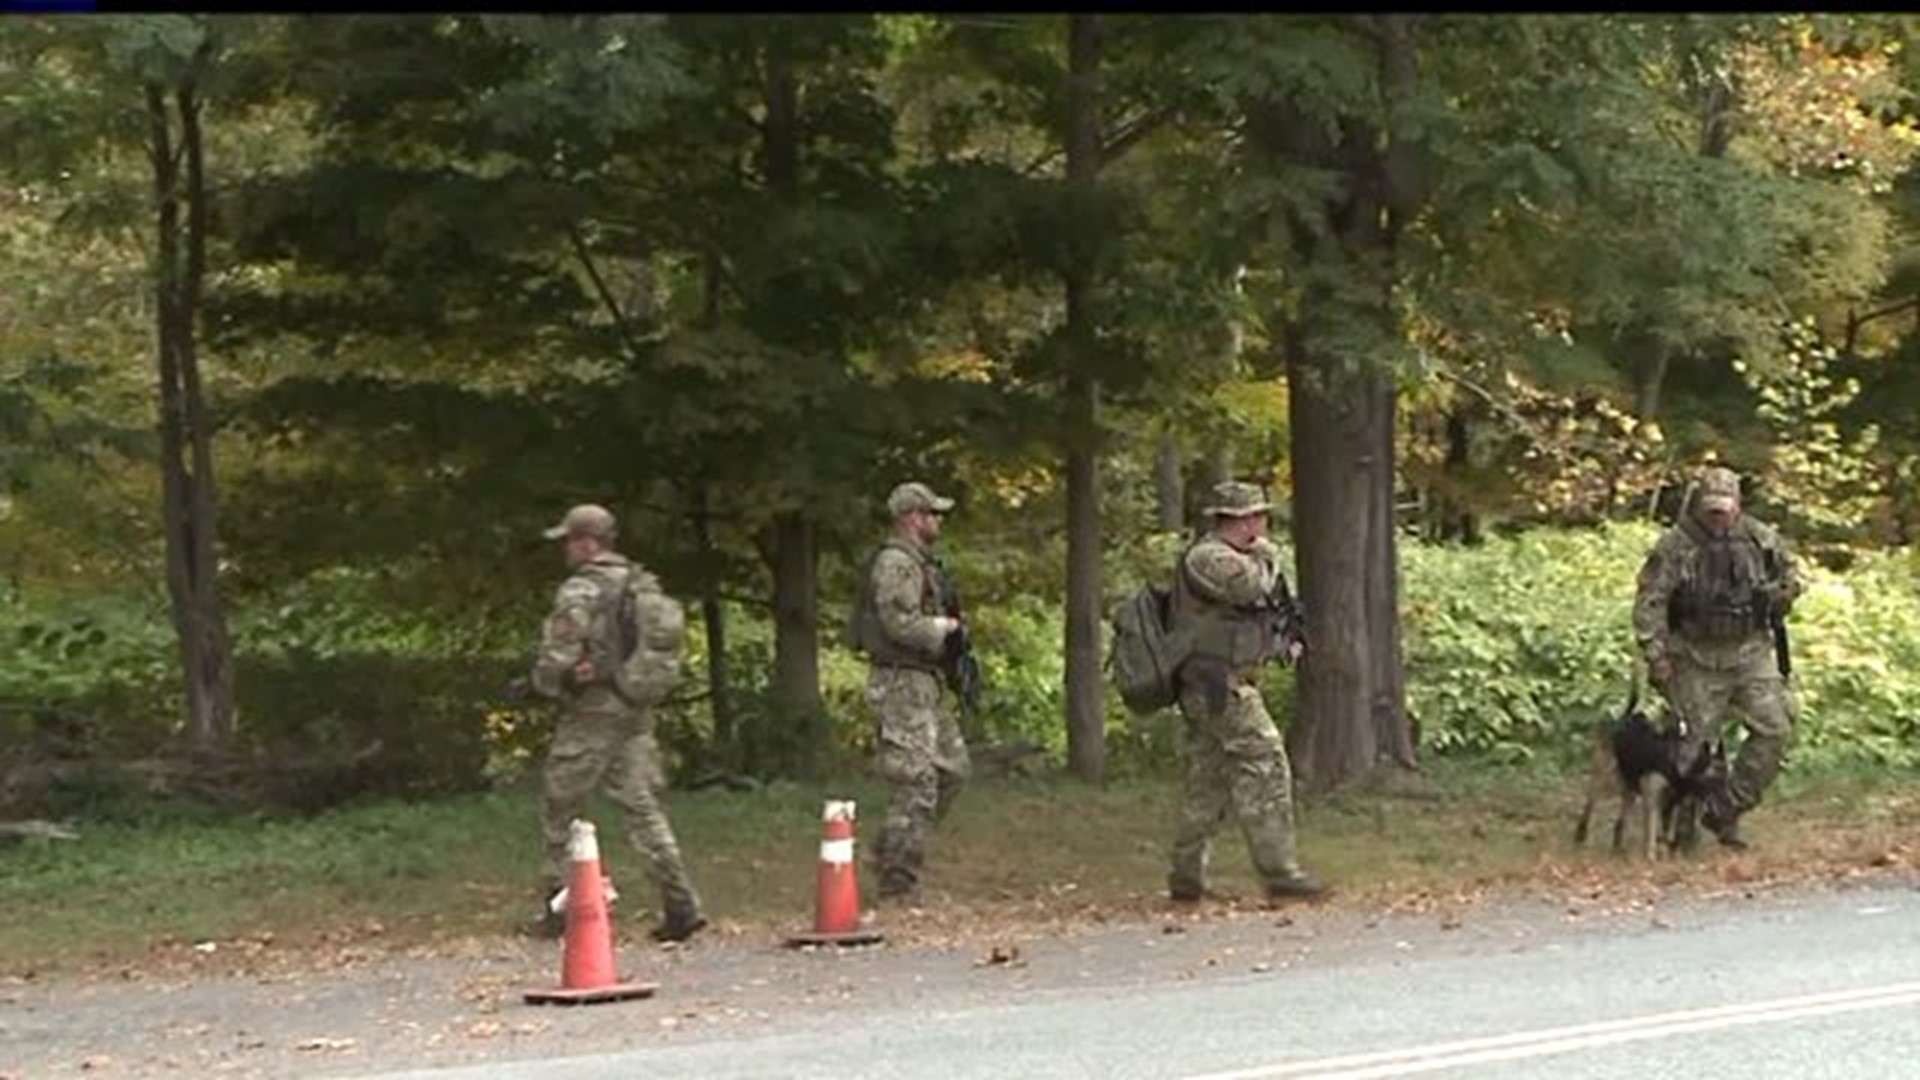 Search continues for Eric Frein